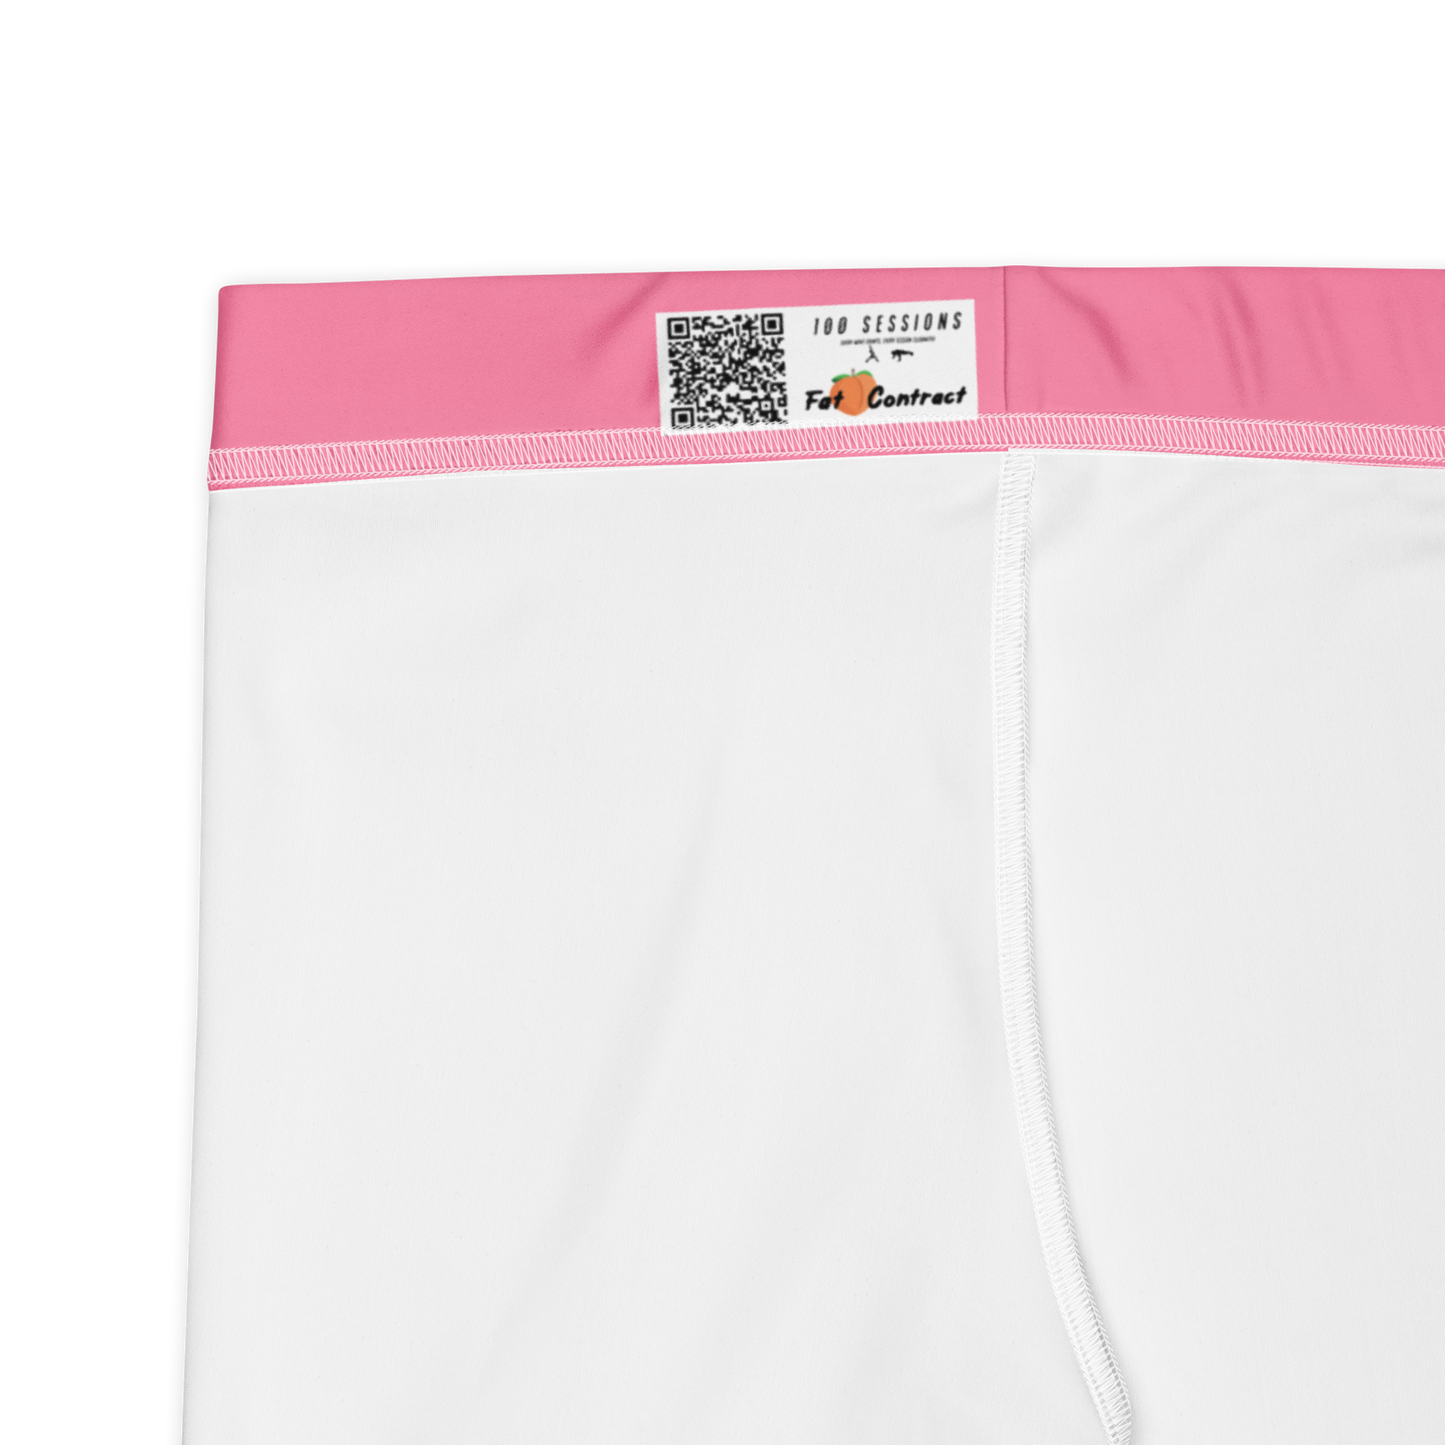 Shorts- Pink Fat Booty Contract